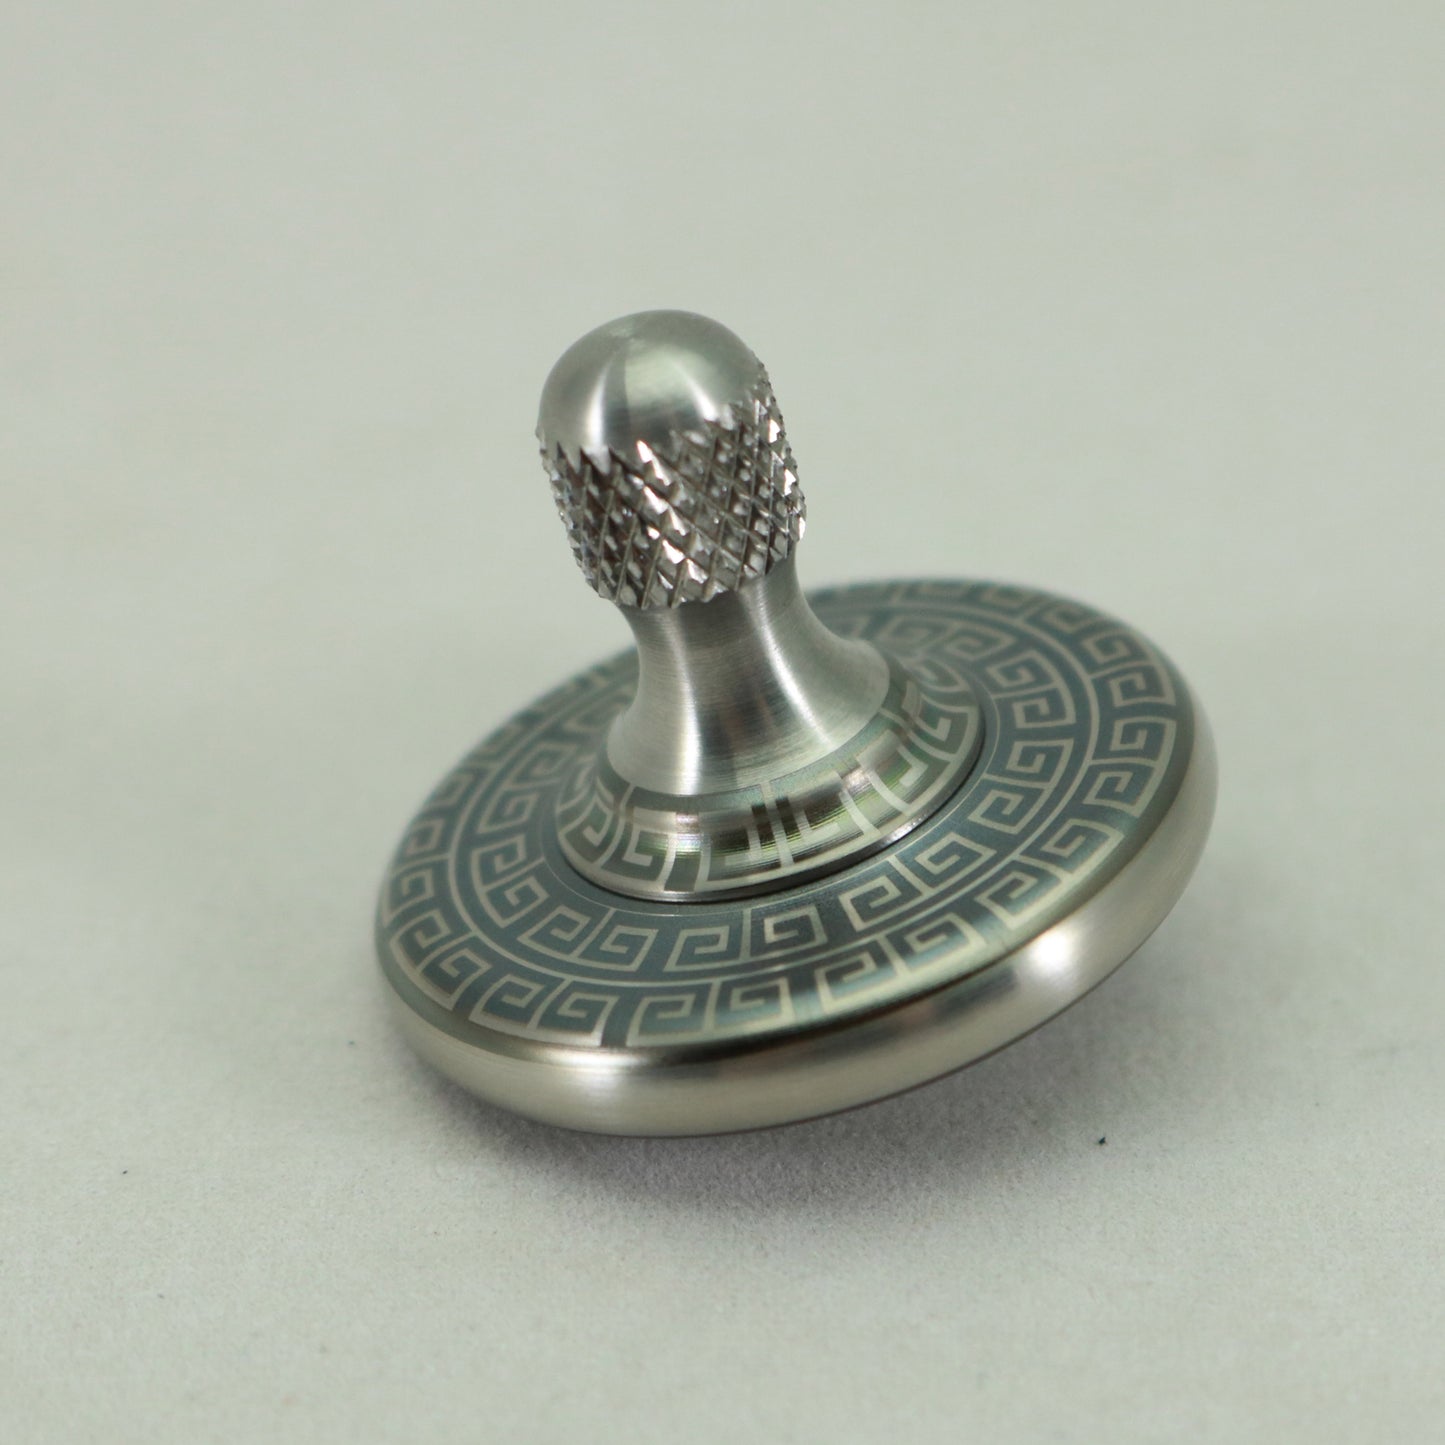 M3 - Laser Etched Aztec Design Stainless Steel Spinning Top